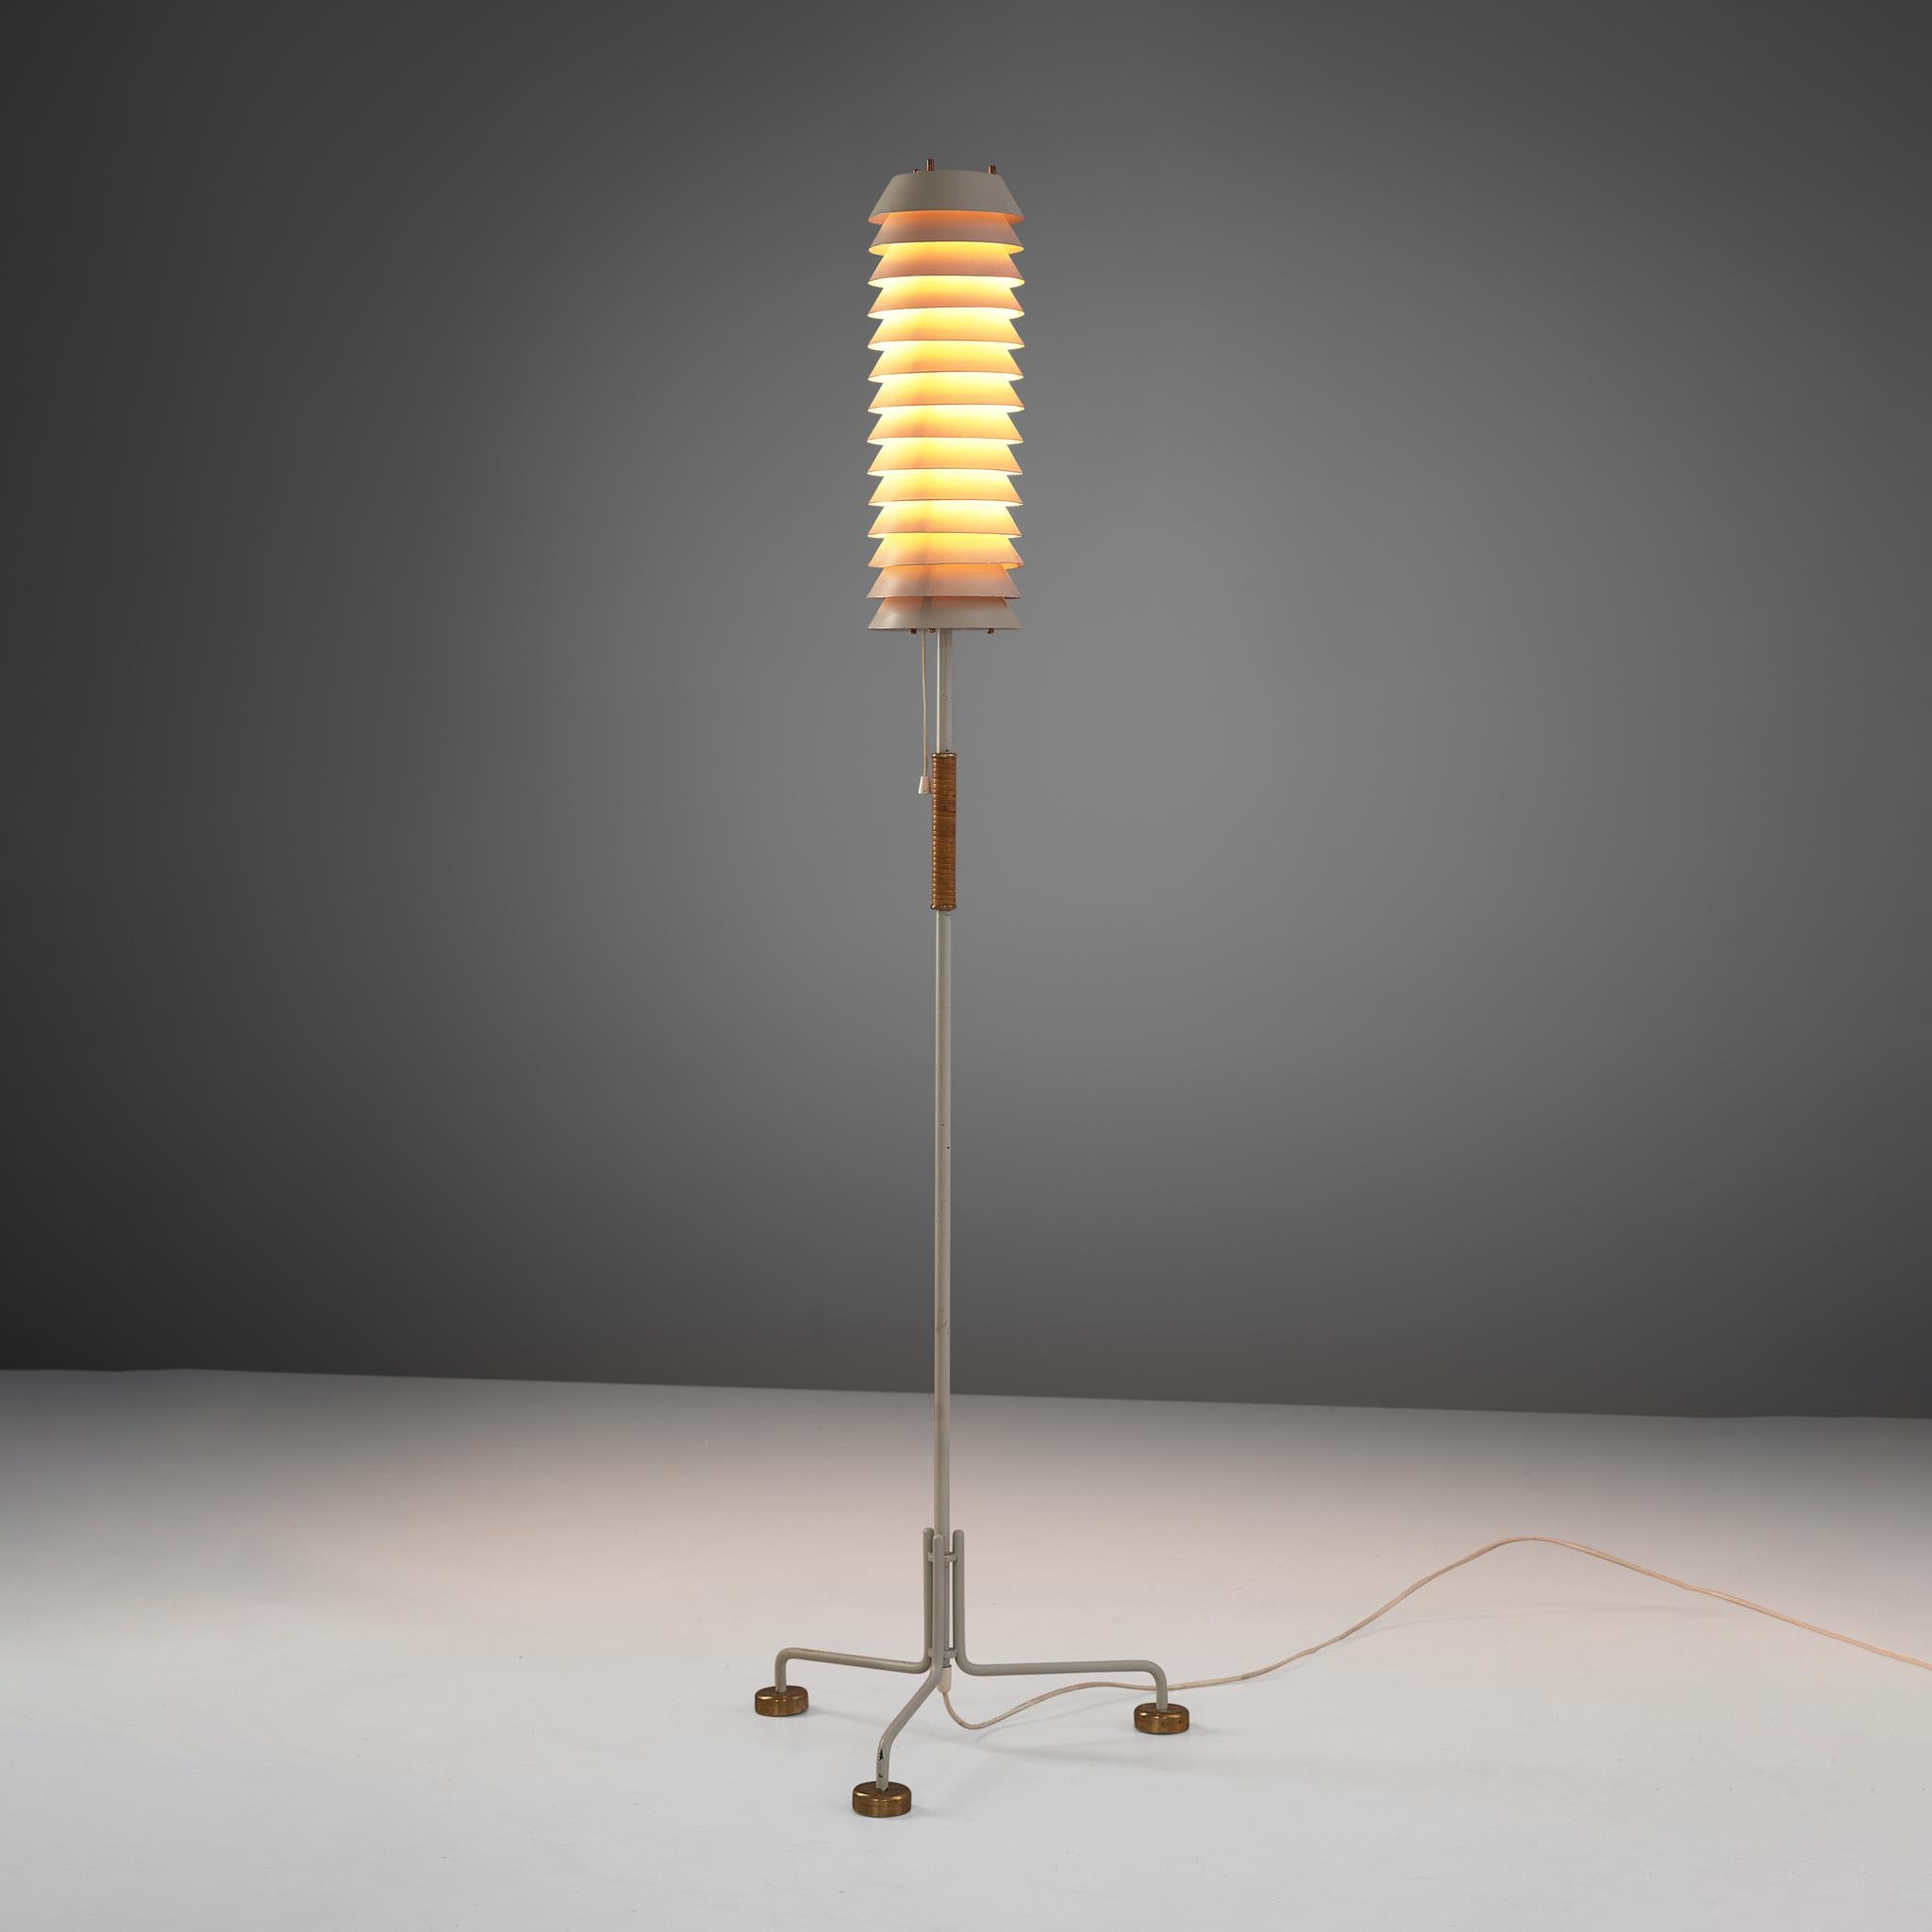 Ilmari Tapiovaara for Hienoteräs, 'Maija the Bee' floor lamp, coated metal and brass, Finland, 1955

The line of Maija lights was designed by Ilmari Tapiovaara in 1955. He was inspired by the children’s book Maya the Bee, in particular the hive with